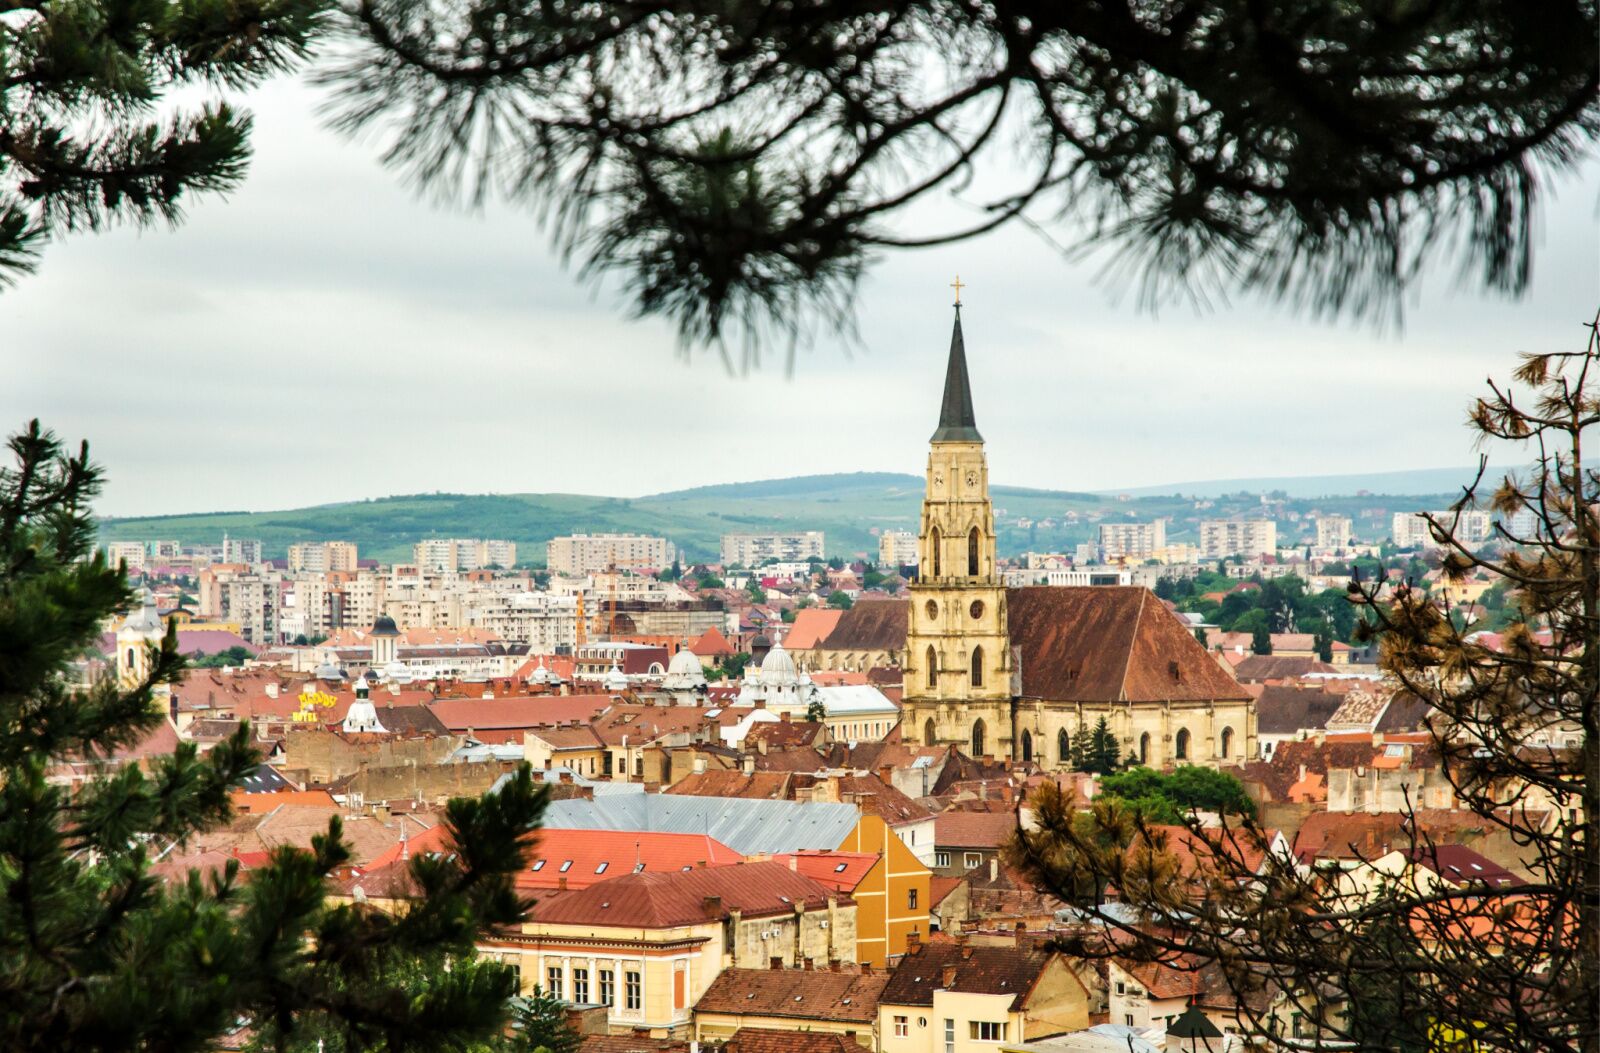 Cluj in Romania, near one of the most spooky forests in Europe